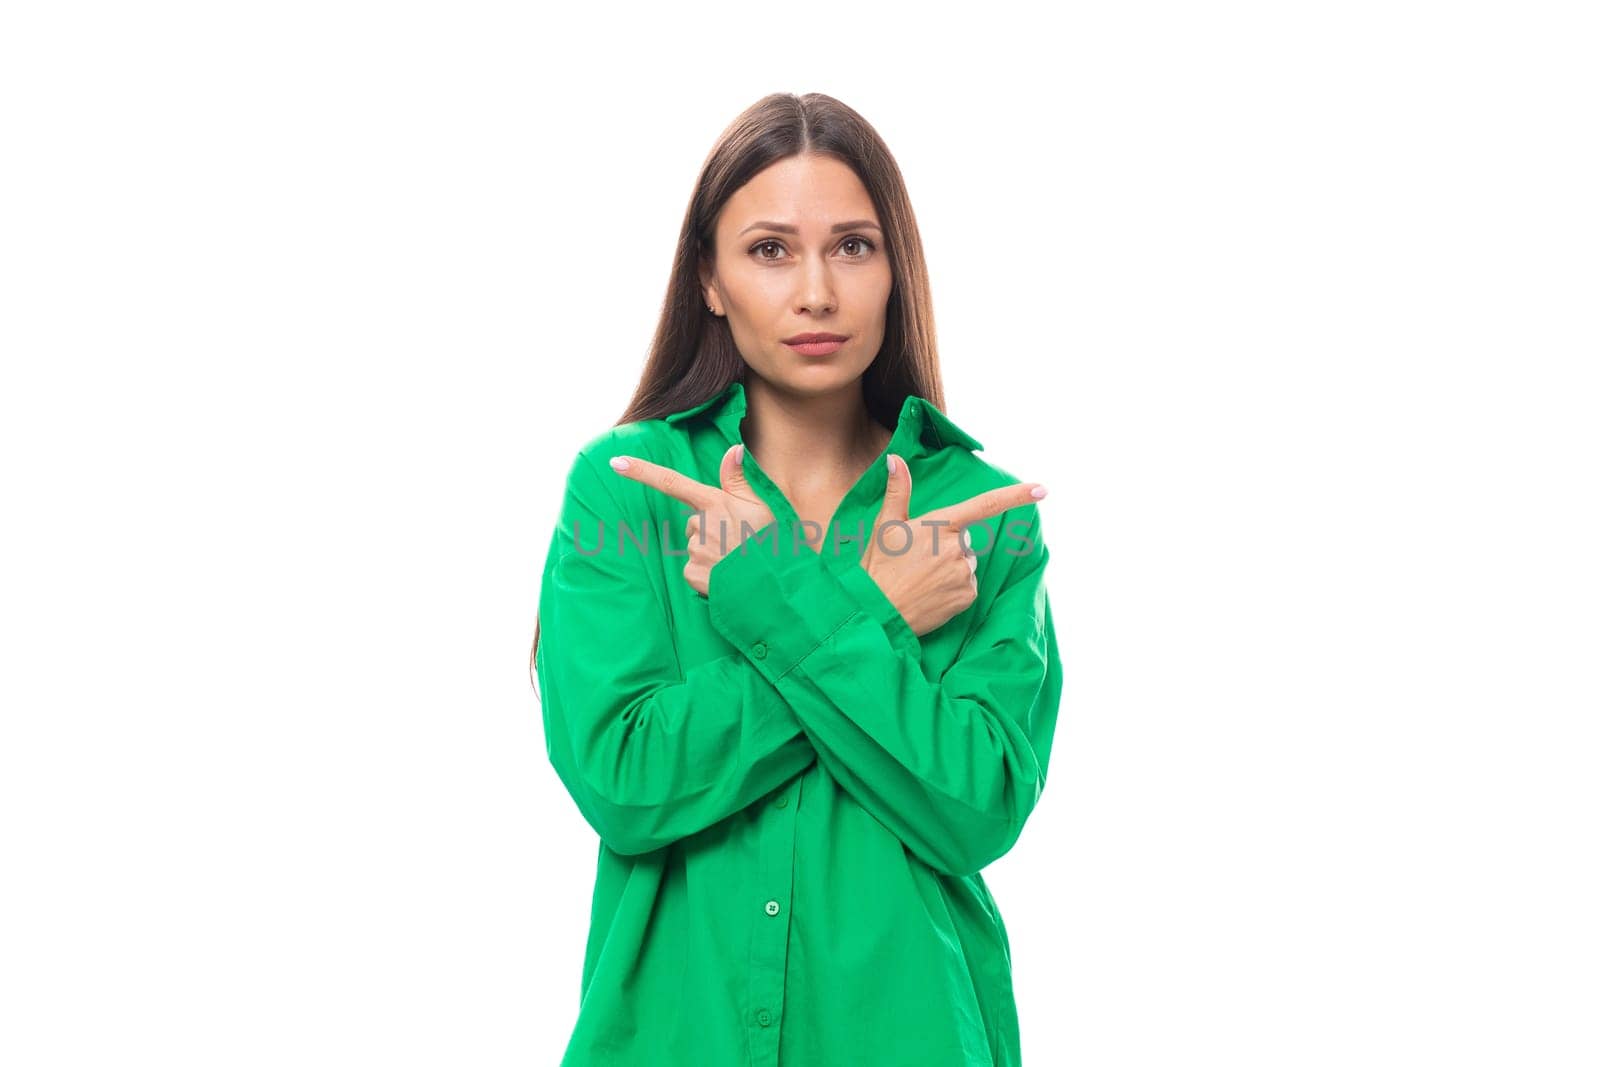 young european female model with well-groomed black hair and make-up dressed in a green shirt crossed her arms in front of her on a white background with copy space by TRMK